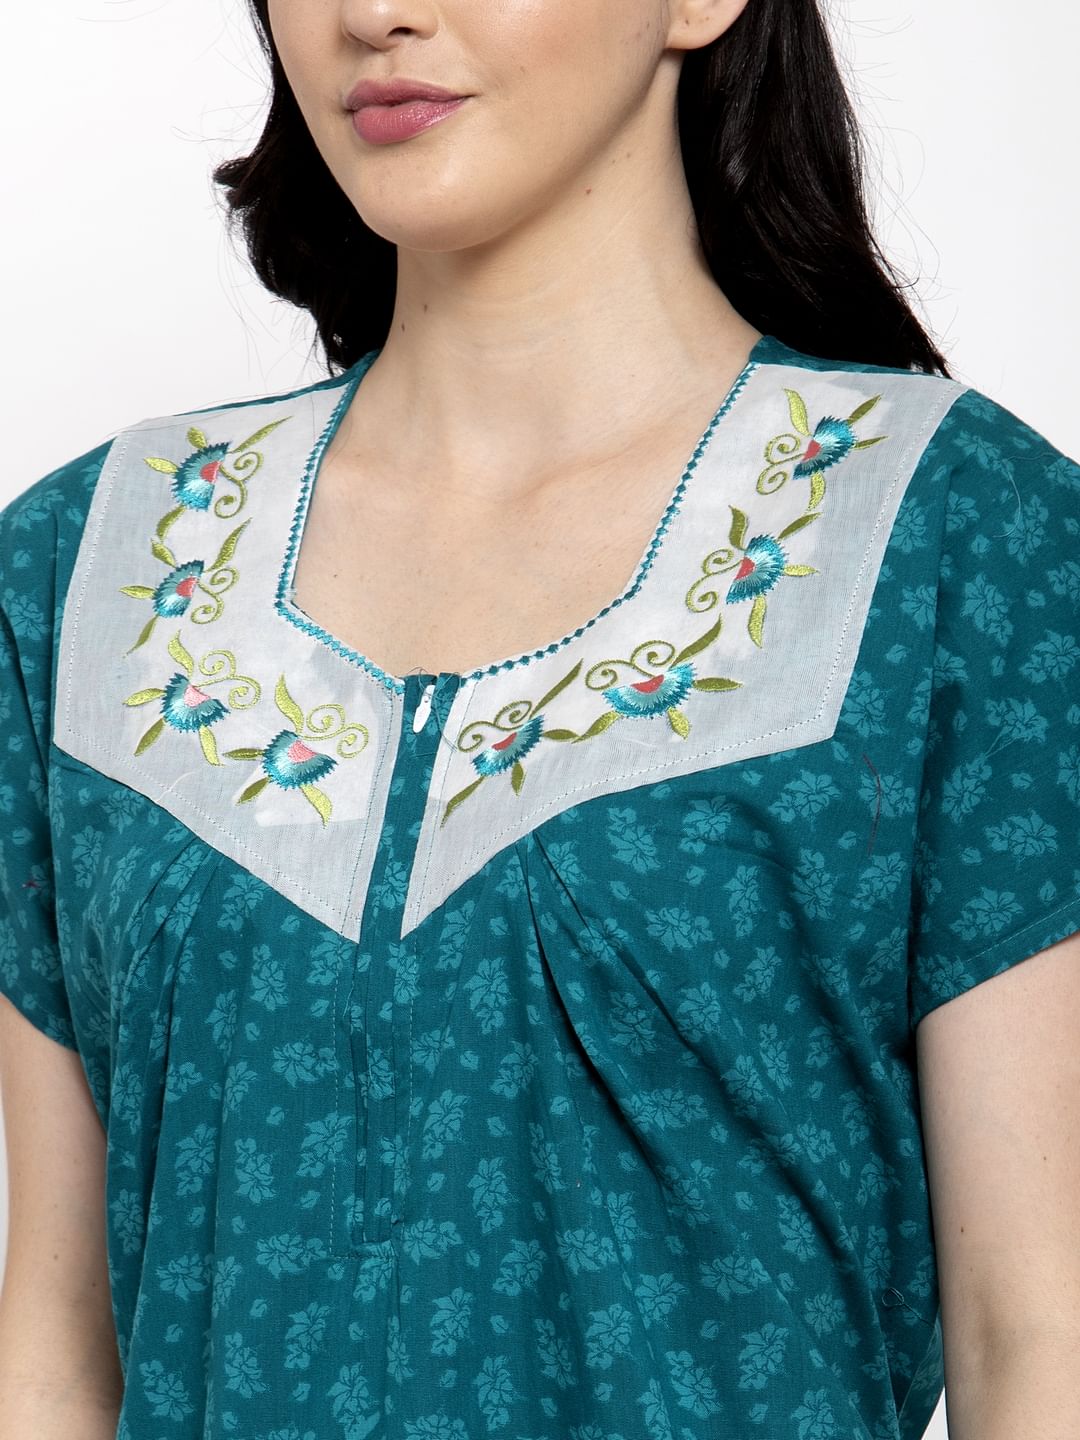 Turquoise Blue Printed Cotton Nighty